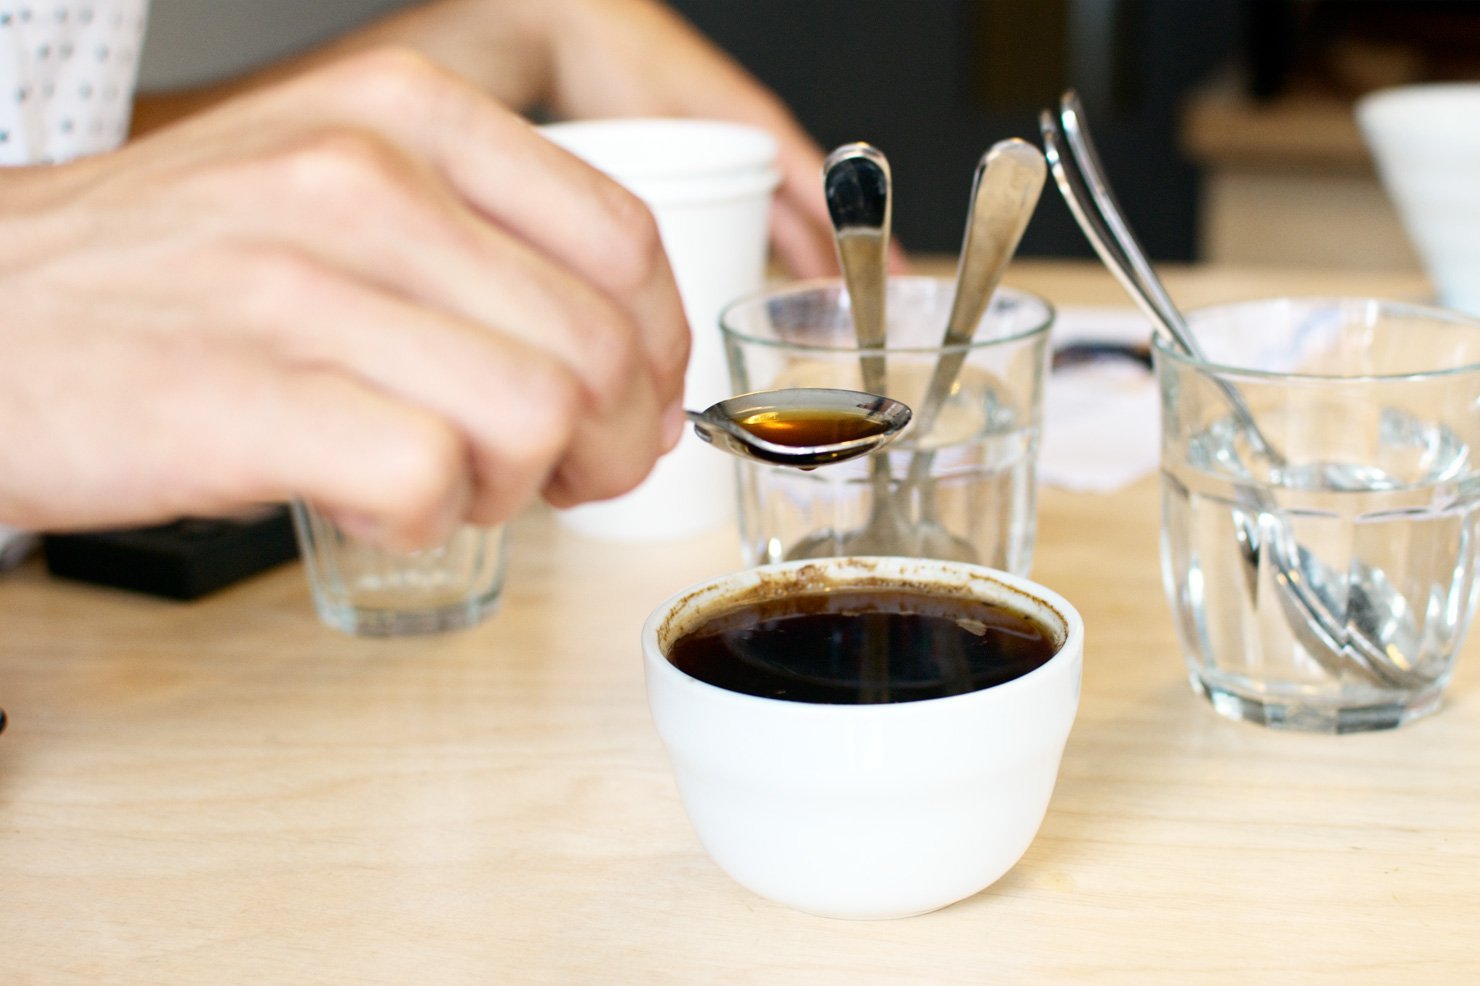 Coffee tasting (or cupping) at Drink, Shop & Dash - a new specialty coffee bar in King's Cross in London